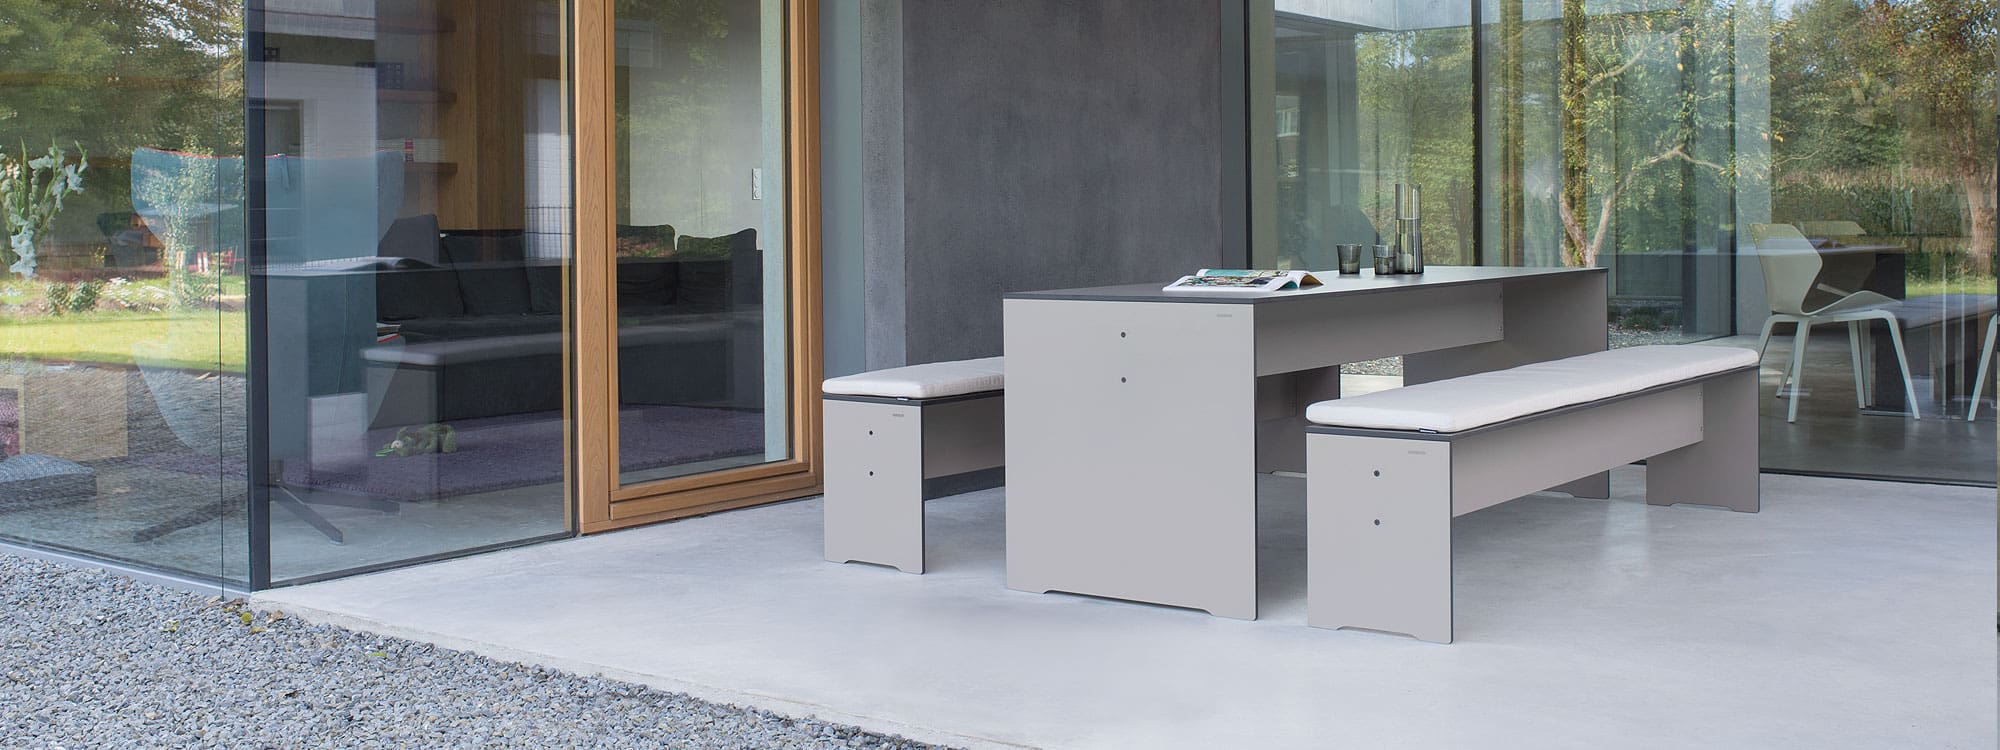 Image of Taupe RIVA modern garden table and benches on modern concrete terrace with floor to ceiling windows in the background